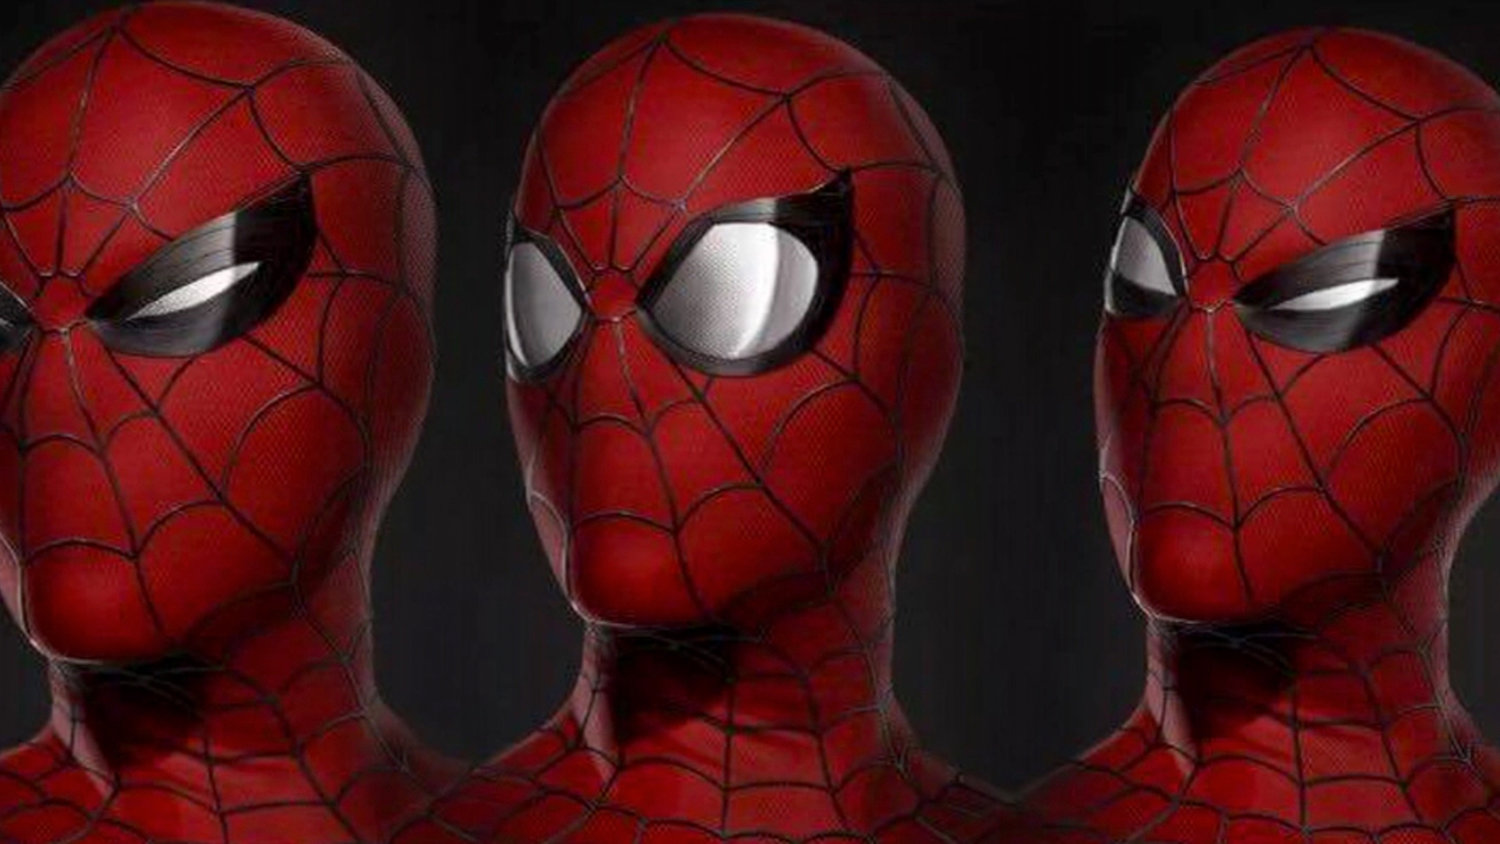 SPIDER-MAN: HOMECOMING Concept Art Shows Spidey's Expressiveness - Gee...